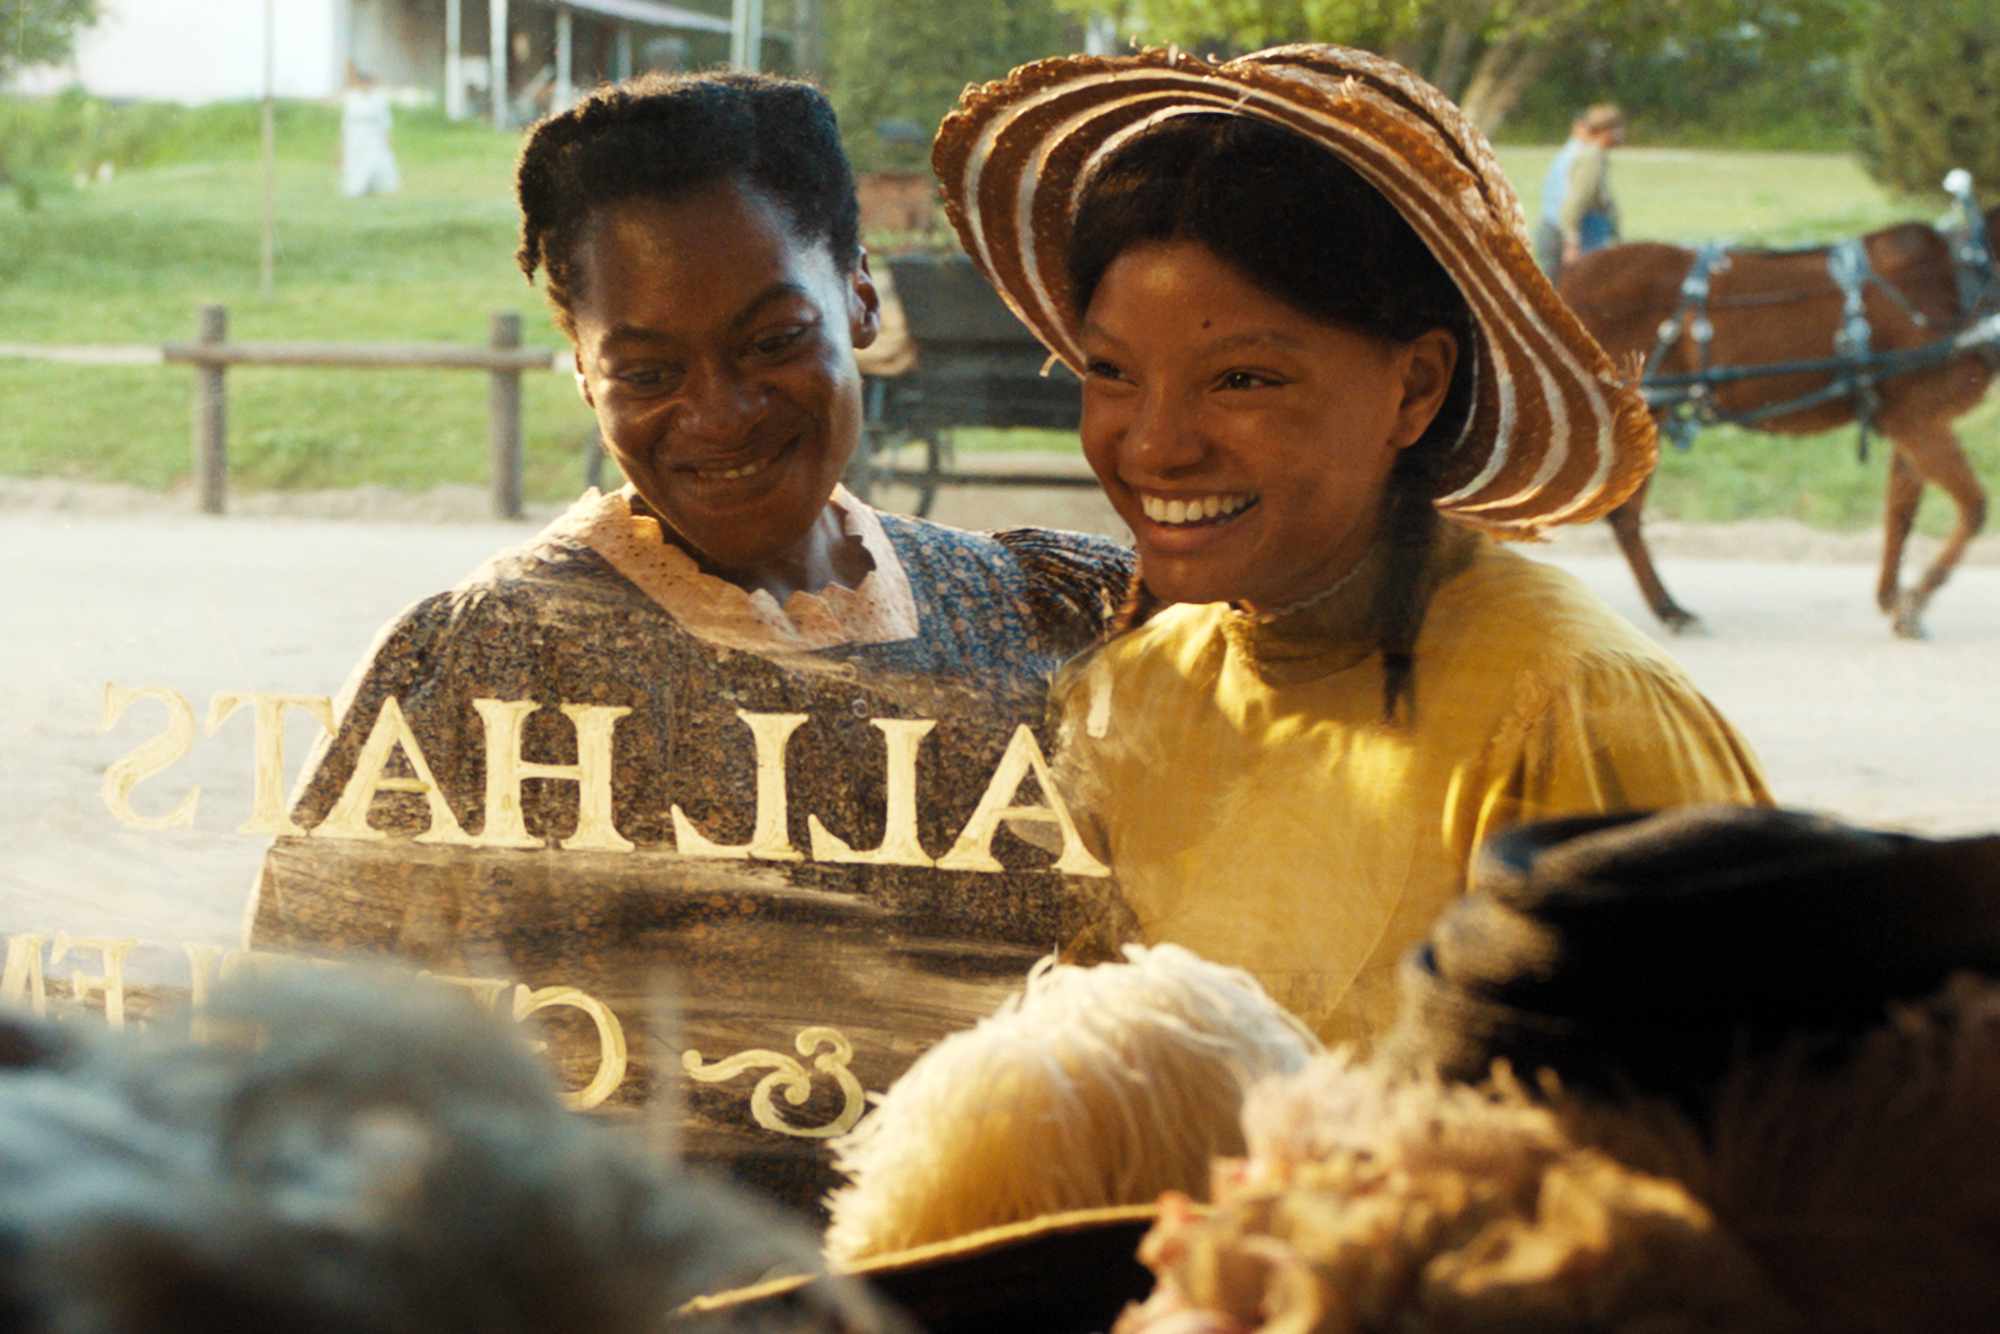 PHYLICIA PEARL MPASI as Young Celie and HALLE BAILEY as Young Nettie in THE COLOR PUPRLE